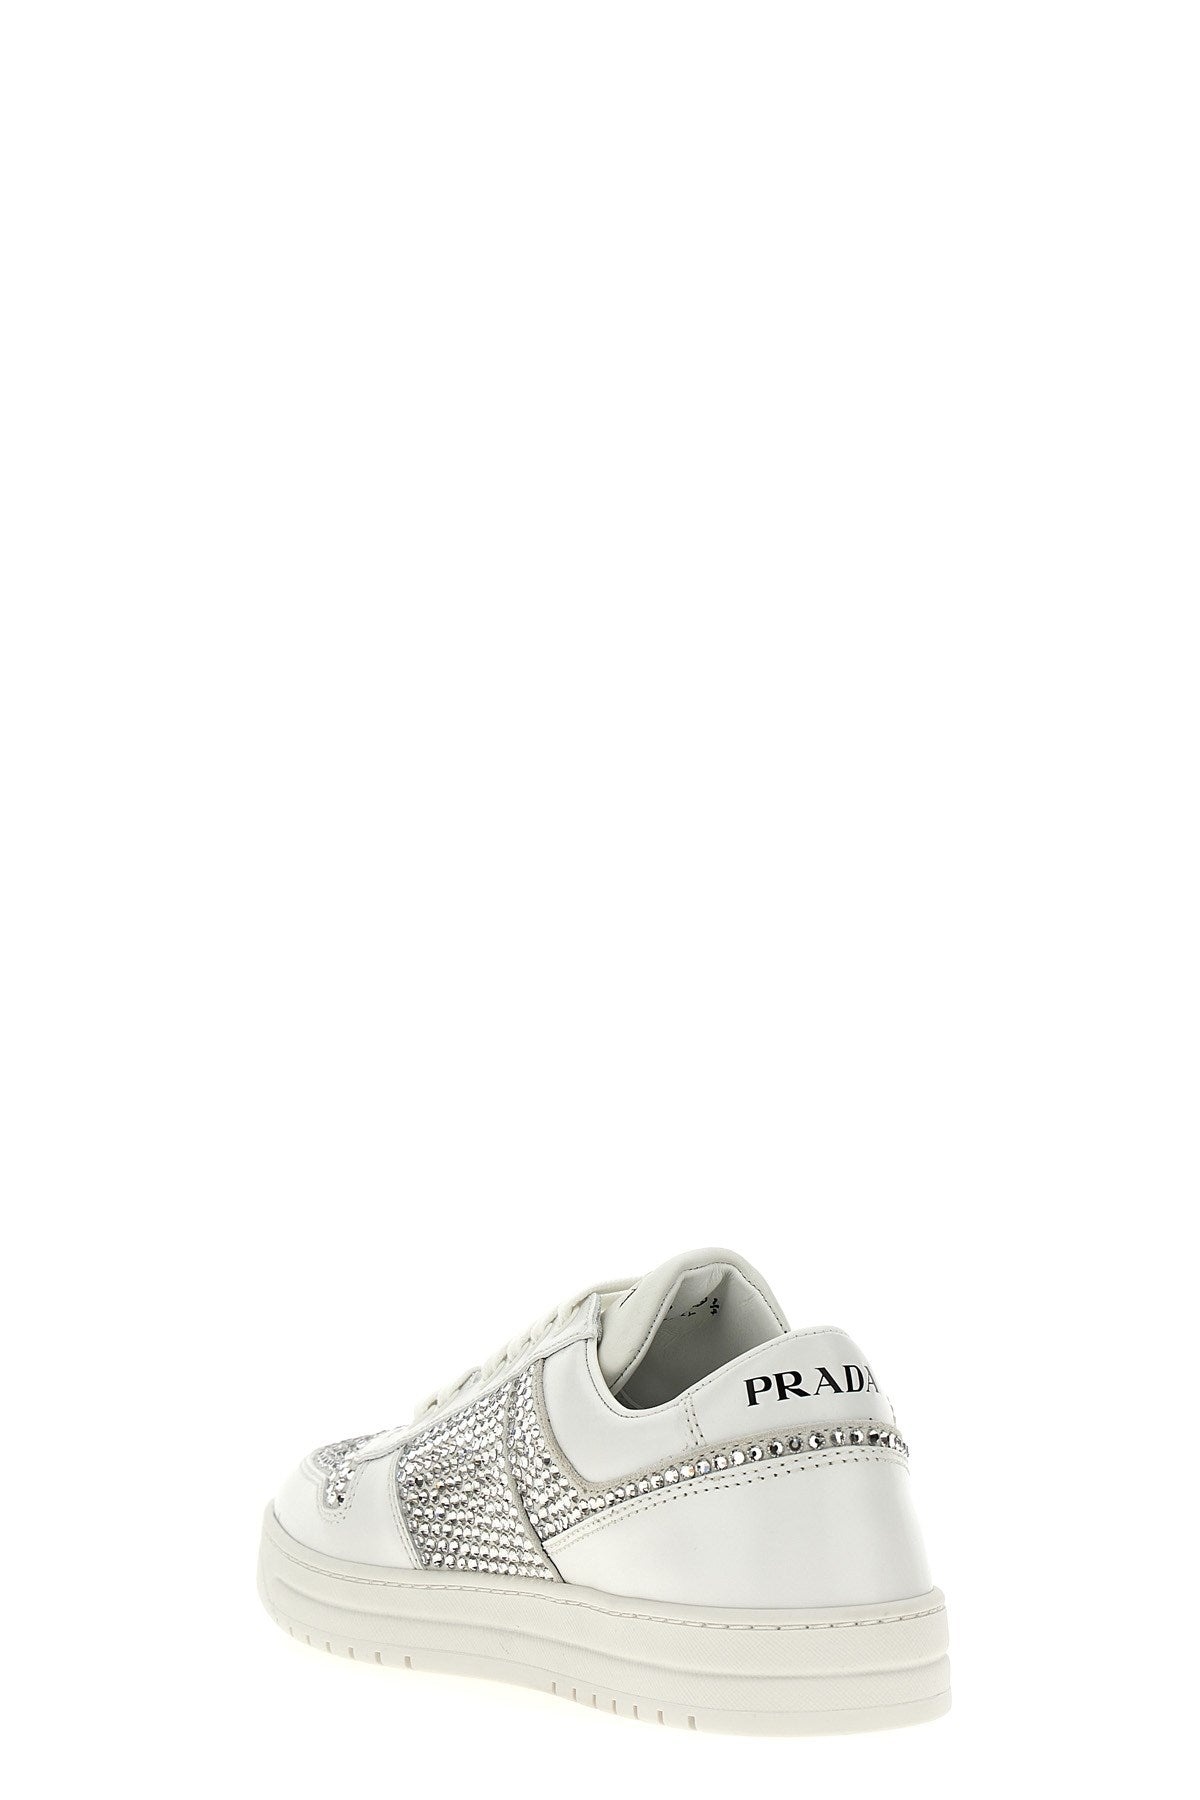 Prada Women Sneakers With Crystals - 2